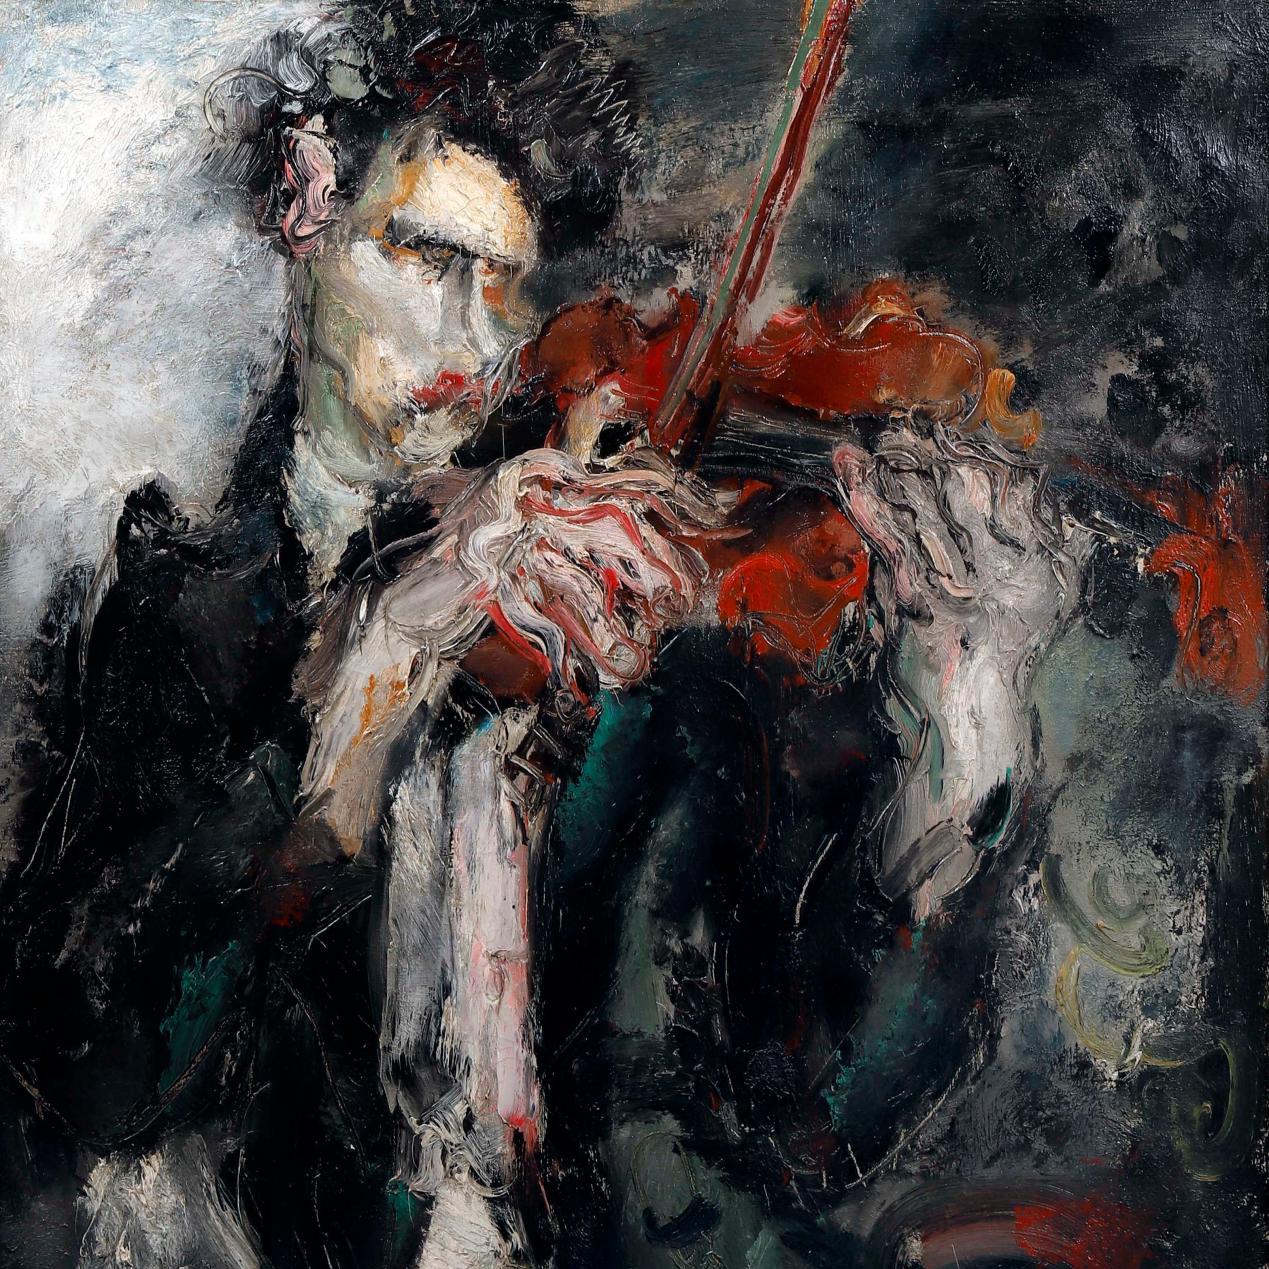 Virtuosity Rewarded for a "Violinist" by Gen Paul   - Lots sold